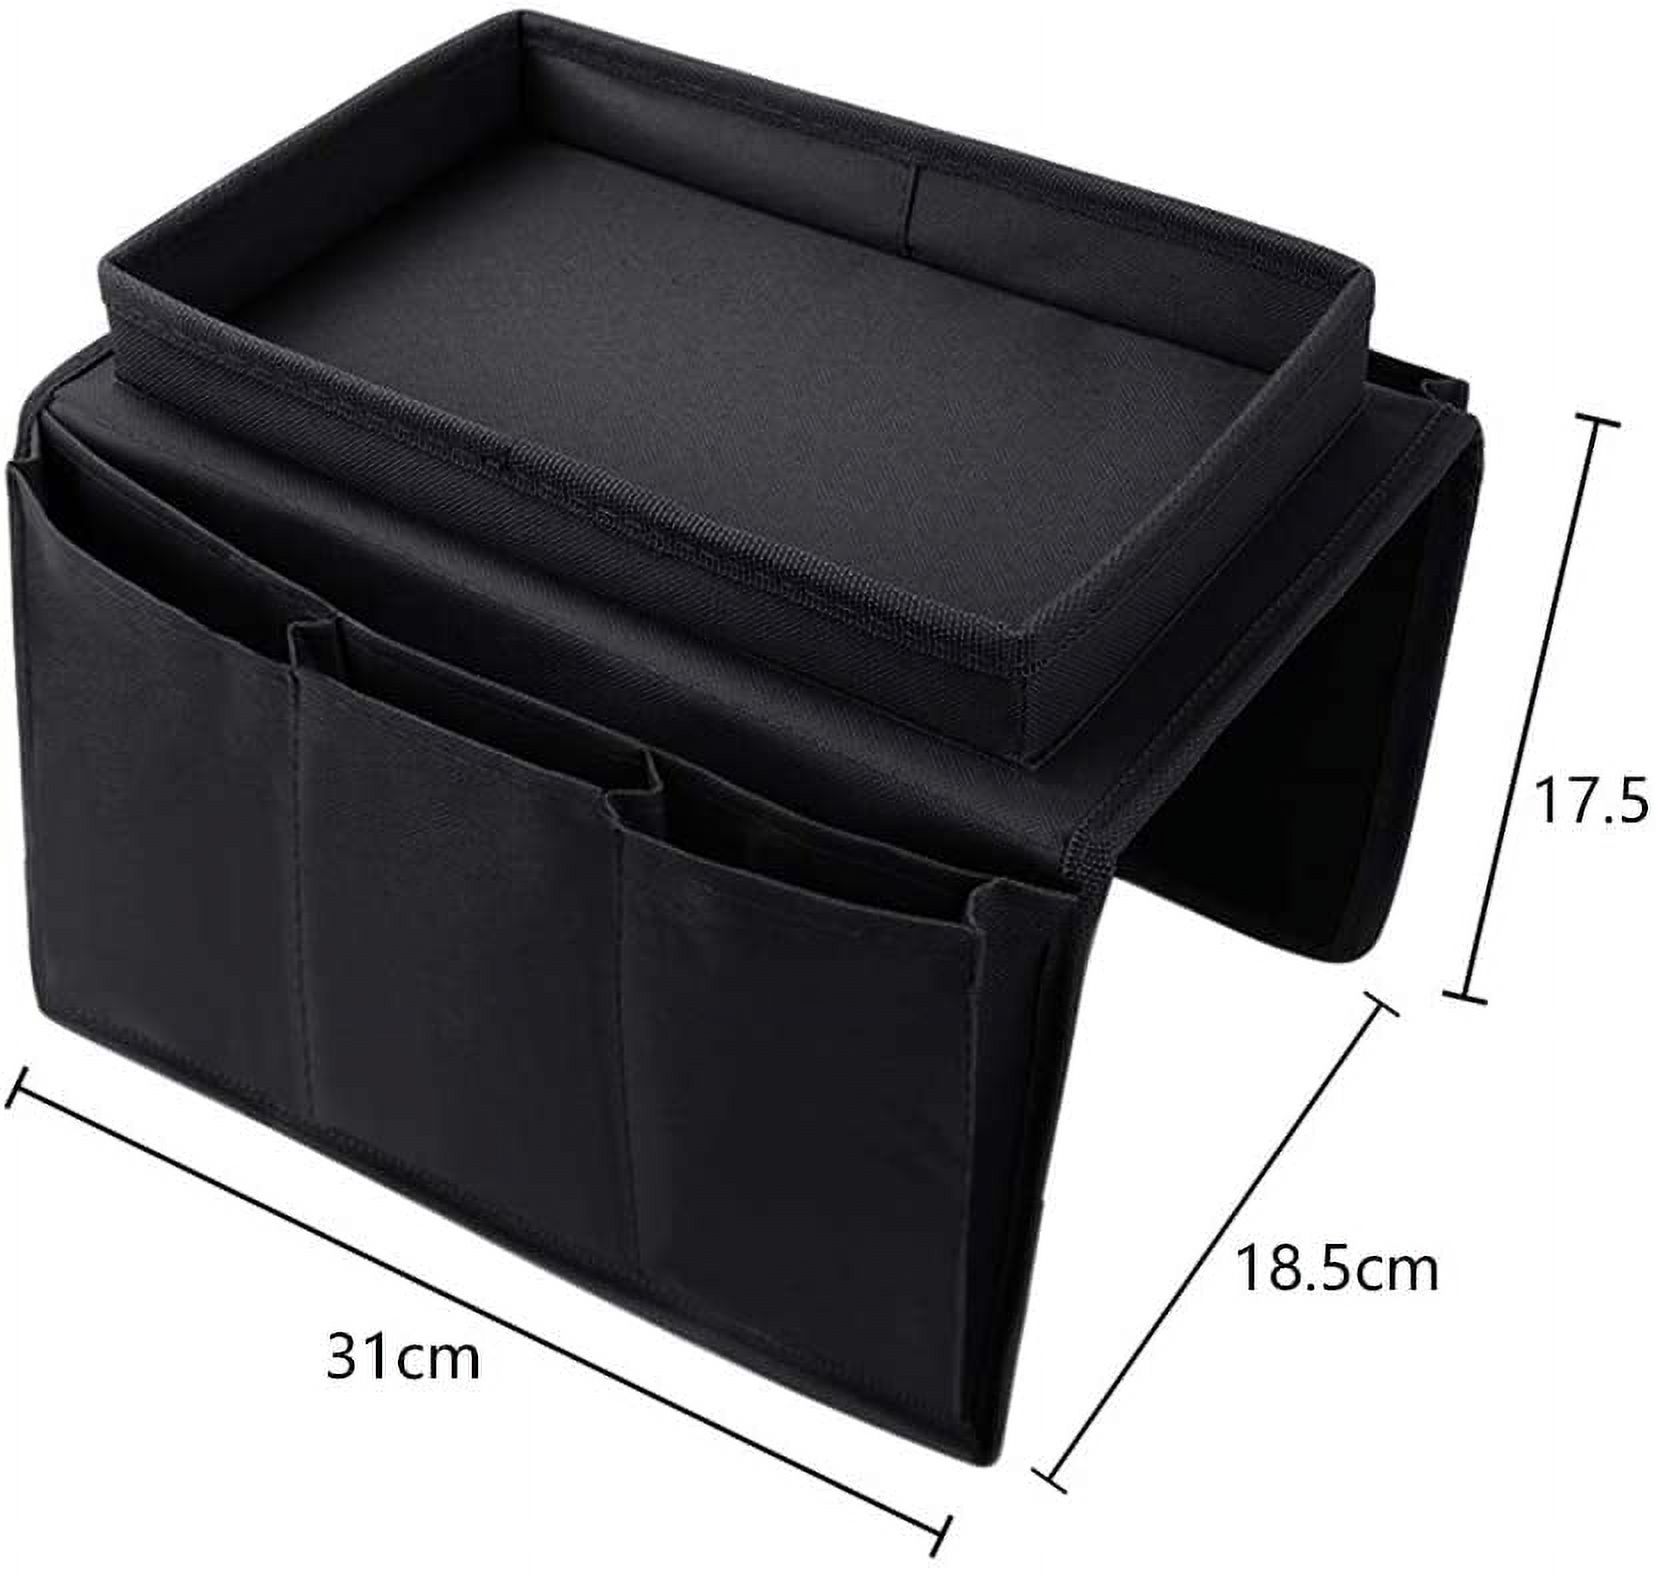 Kusmil Sofa Armrest Organizer with Cup Holder Tray Recliner Couch Armchair Caddy Bedside Storage Pockets Bag for Cellphone Tablet Book Magazines - image 4 of 6